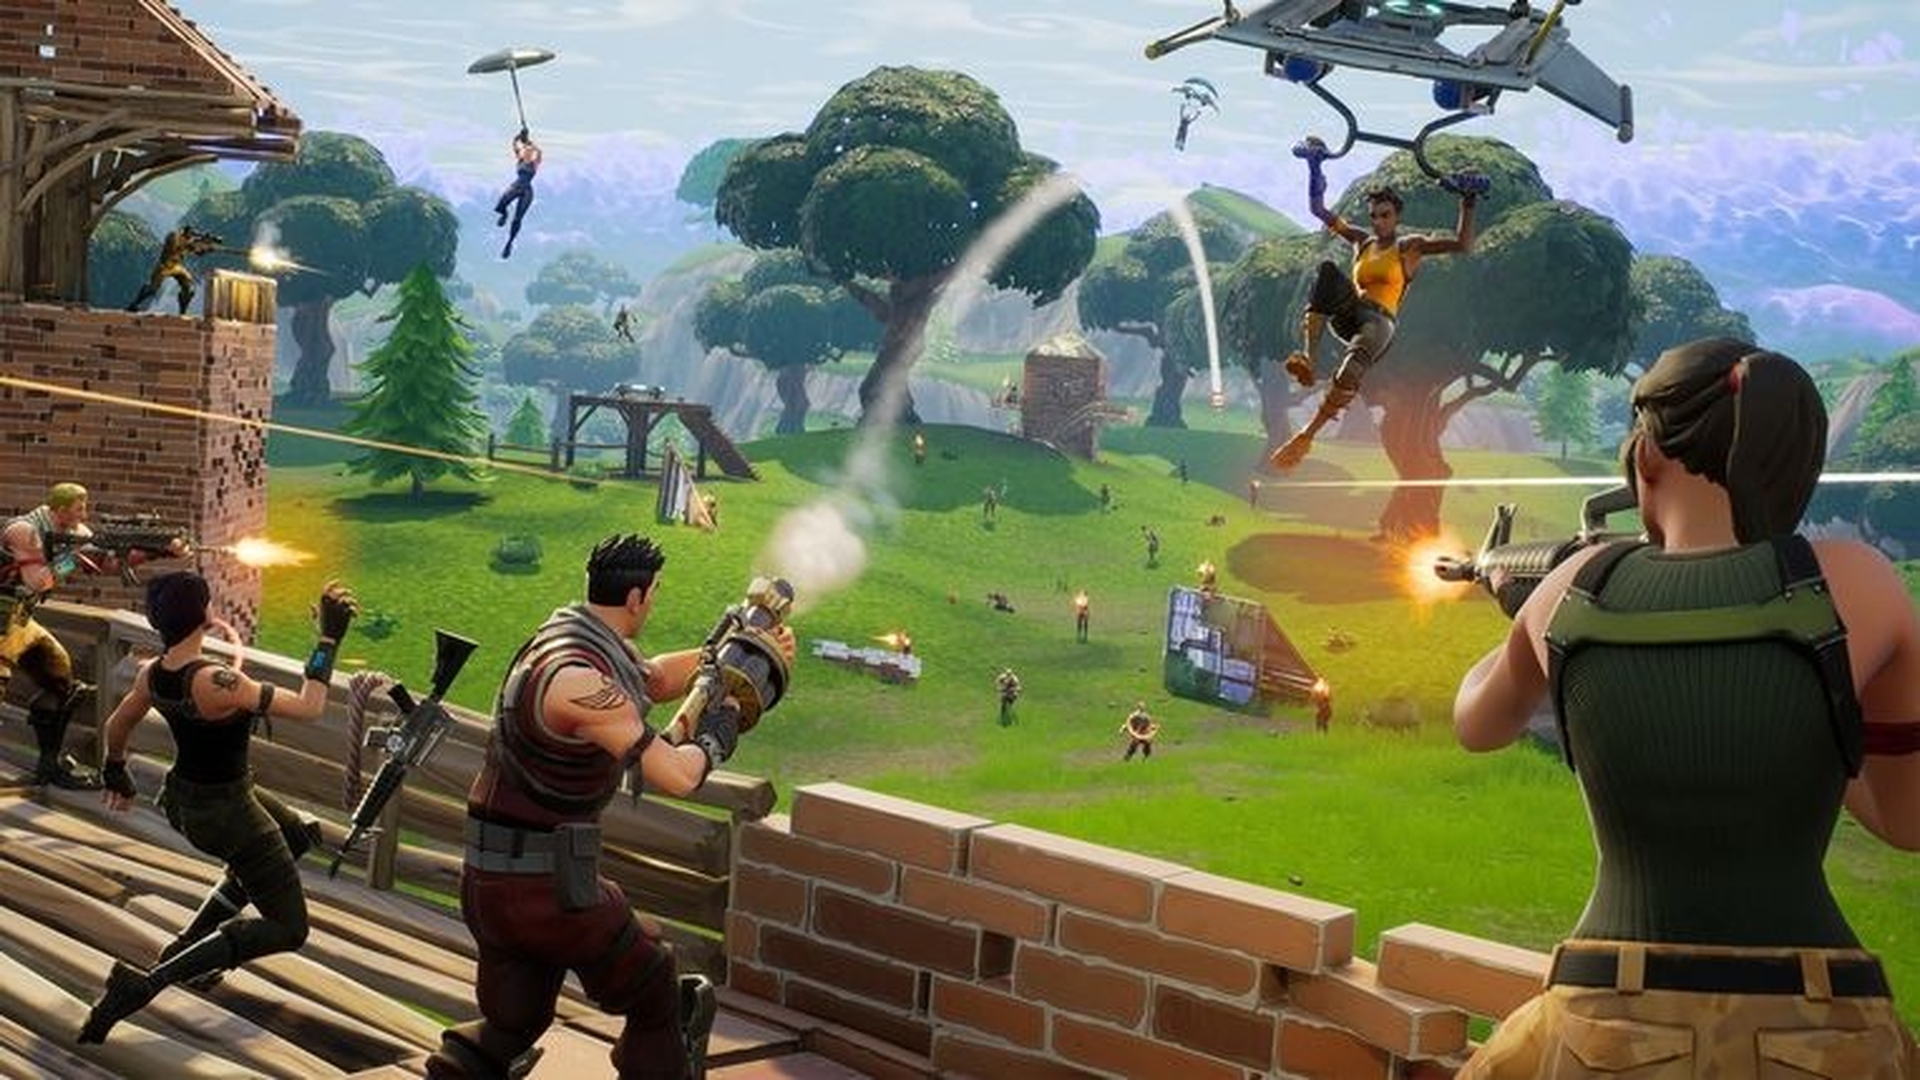 In this article, we are going to go over how to ignite structures in Fortnite, which requires Firefly Jars. We will go over how to obtain and use these jars.